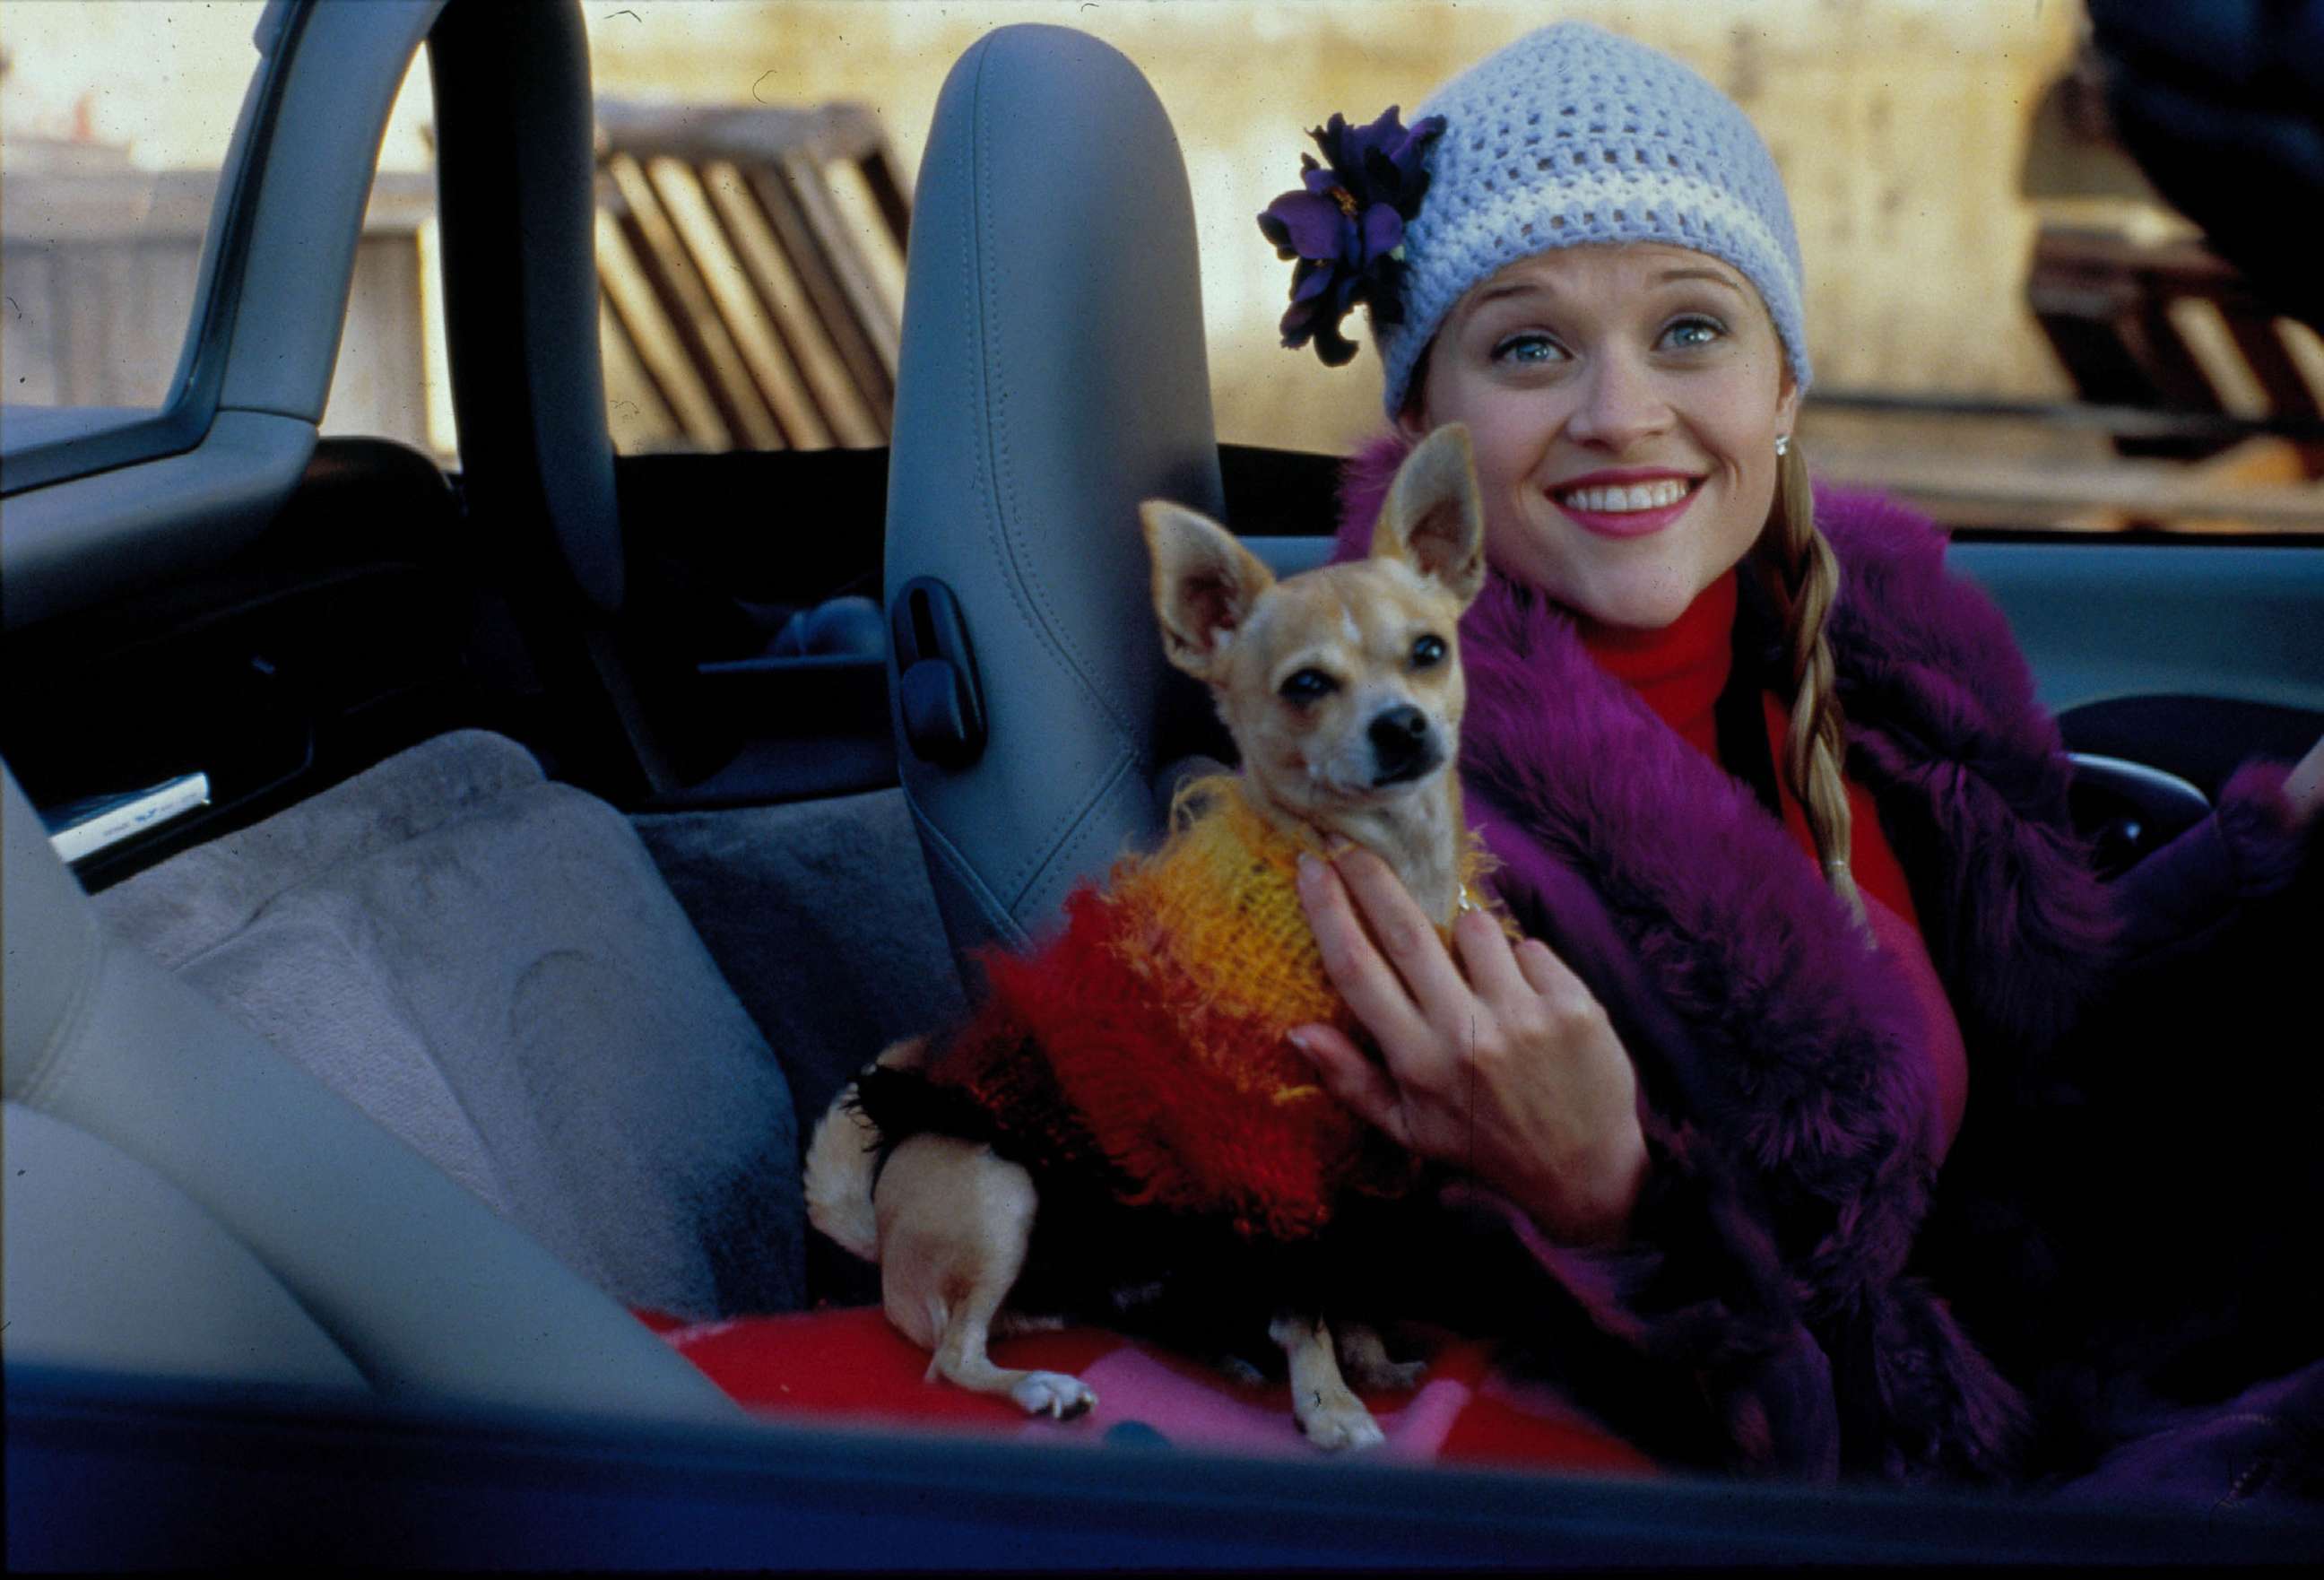 PHOTO: Reese Witherspoon is shown in a scene from Legally Blonde.